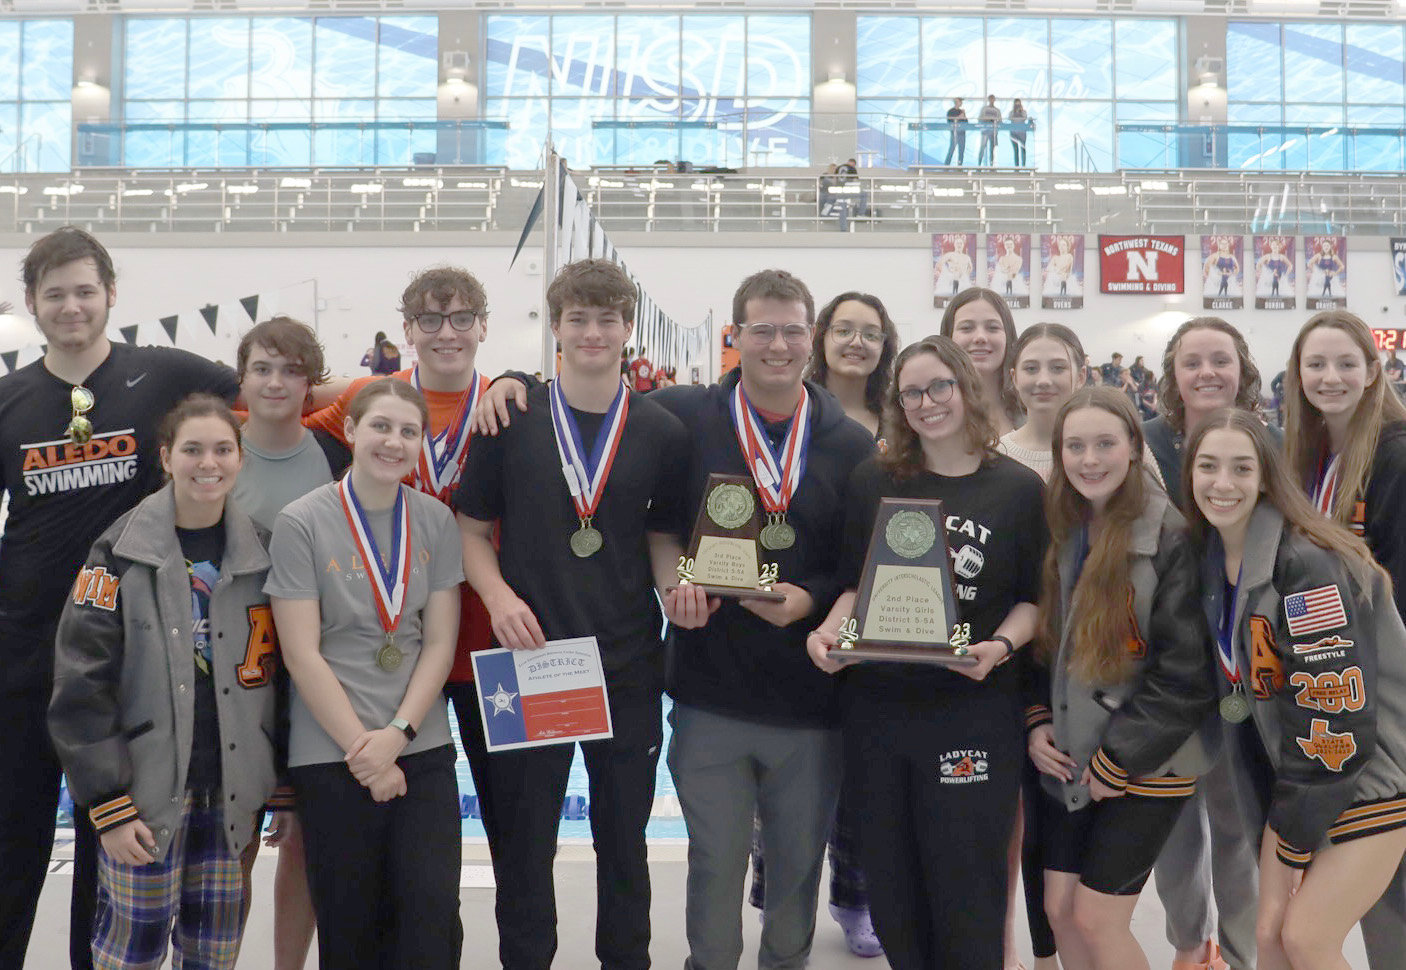 Regional swimming qualifiers from Aledo High School are (from left) Hunter Gregory, Tila Moeller, Brady Ludlow, Haley Roberson, Porter Lane, Sam Ogden, Tanner Howse, Breanna Olivieri, Madeline Gordy, Avery Faulkner, Alli Faulkner, Corah Satterfield, Julia Gordy, Victoria Crews, and Natalie Hutson. Not shown are Addison Speed, Bradyn Baughman, Alex Pomales, and Kyle Scharlow.